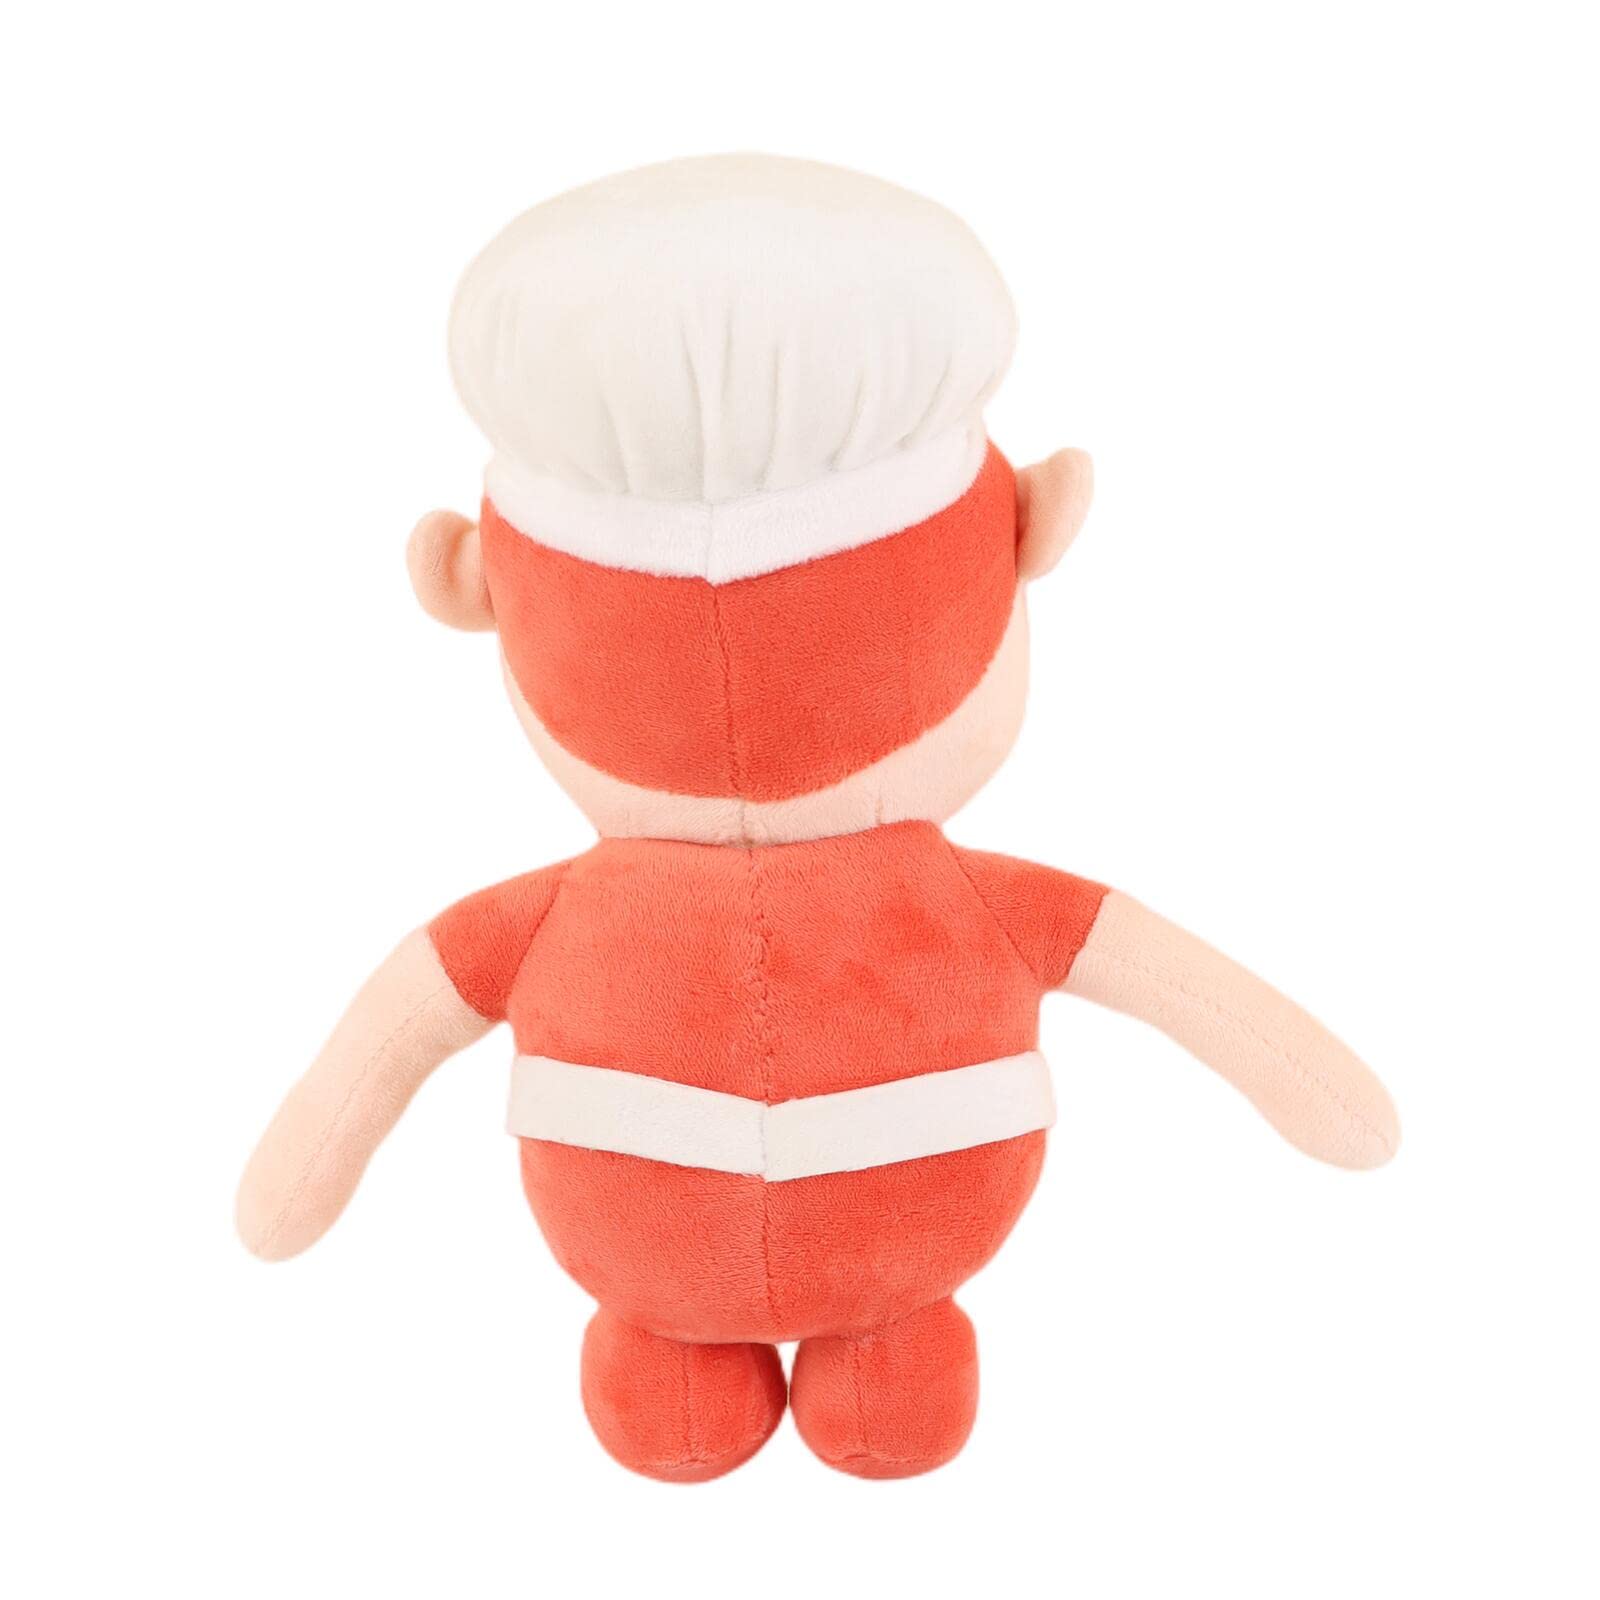 2023 Pizza Tower Peppino Plush Toys Cute Soft Gustavo The Noise